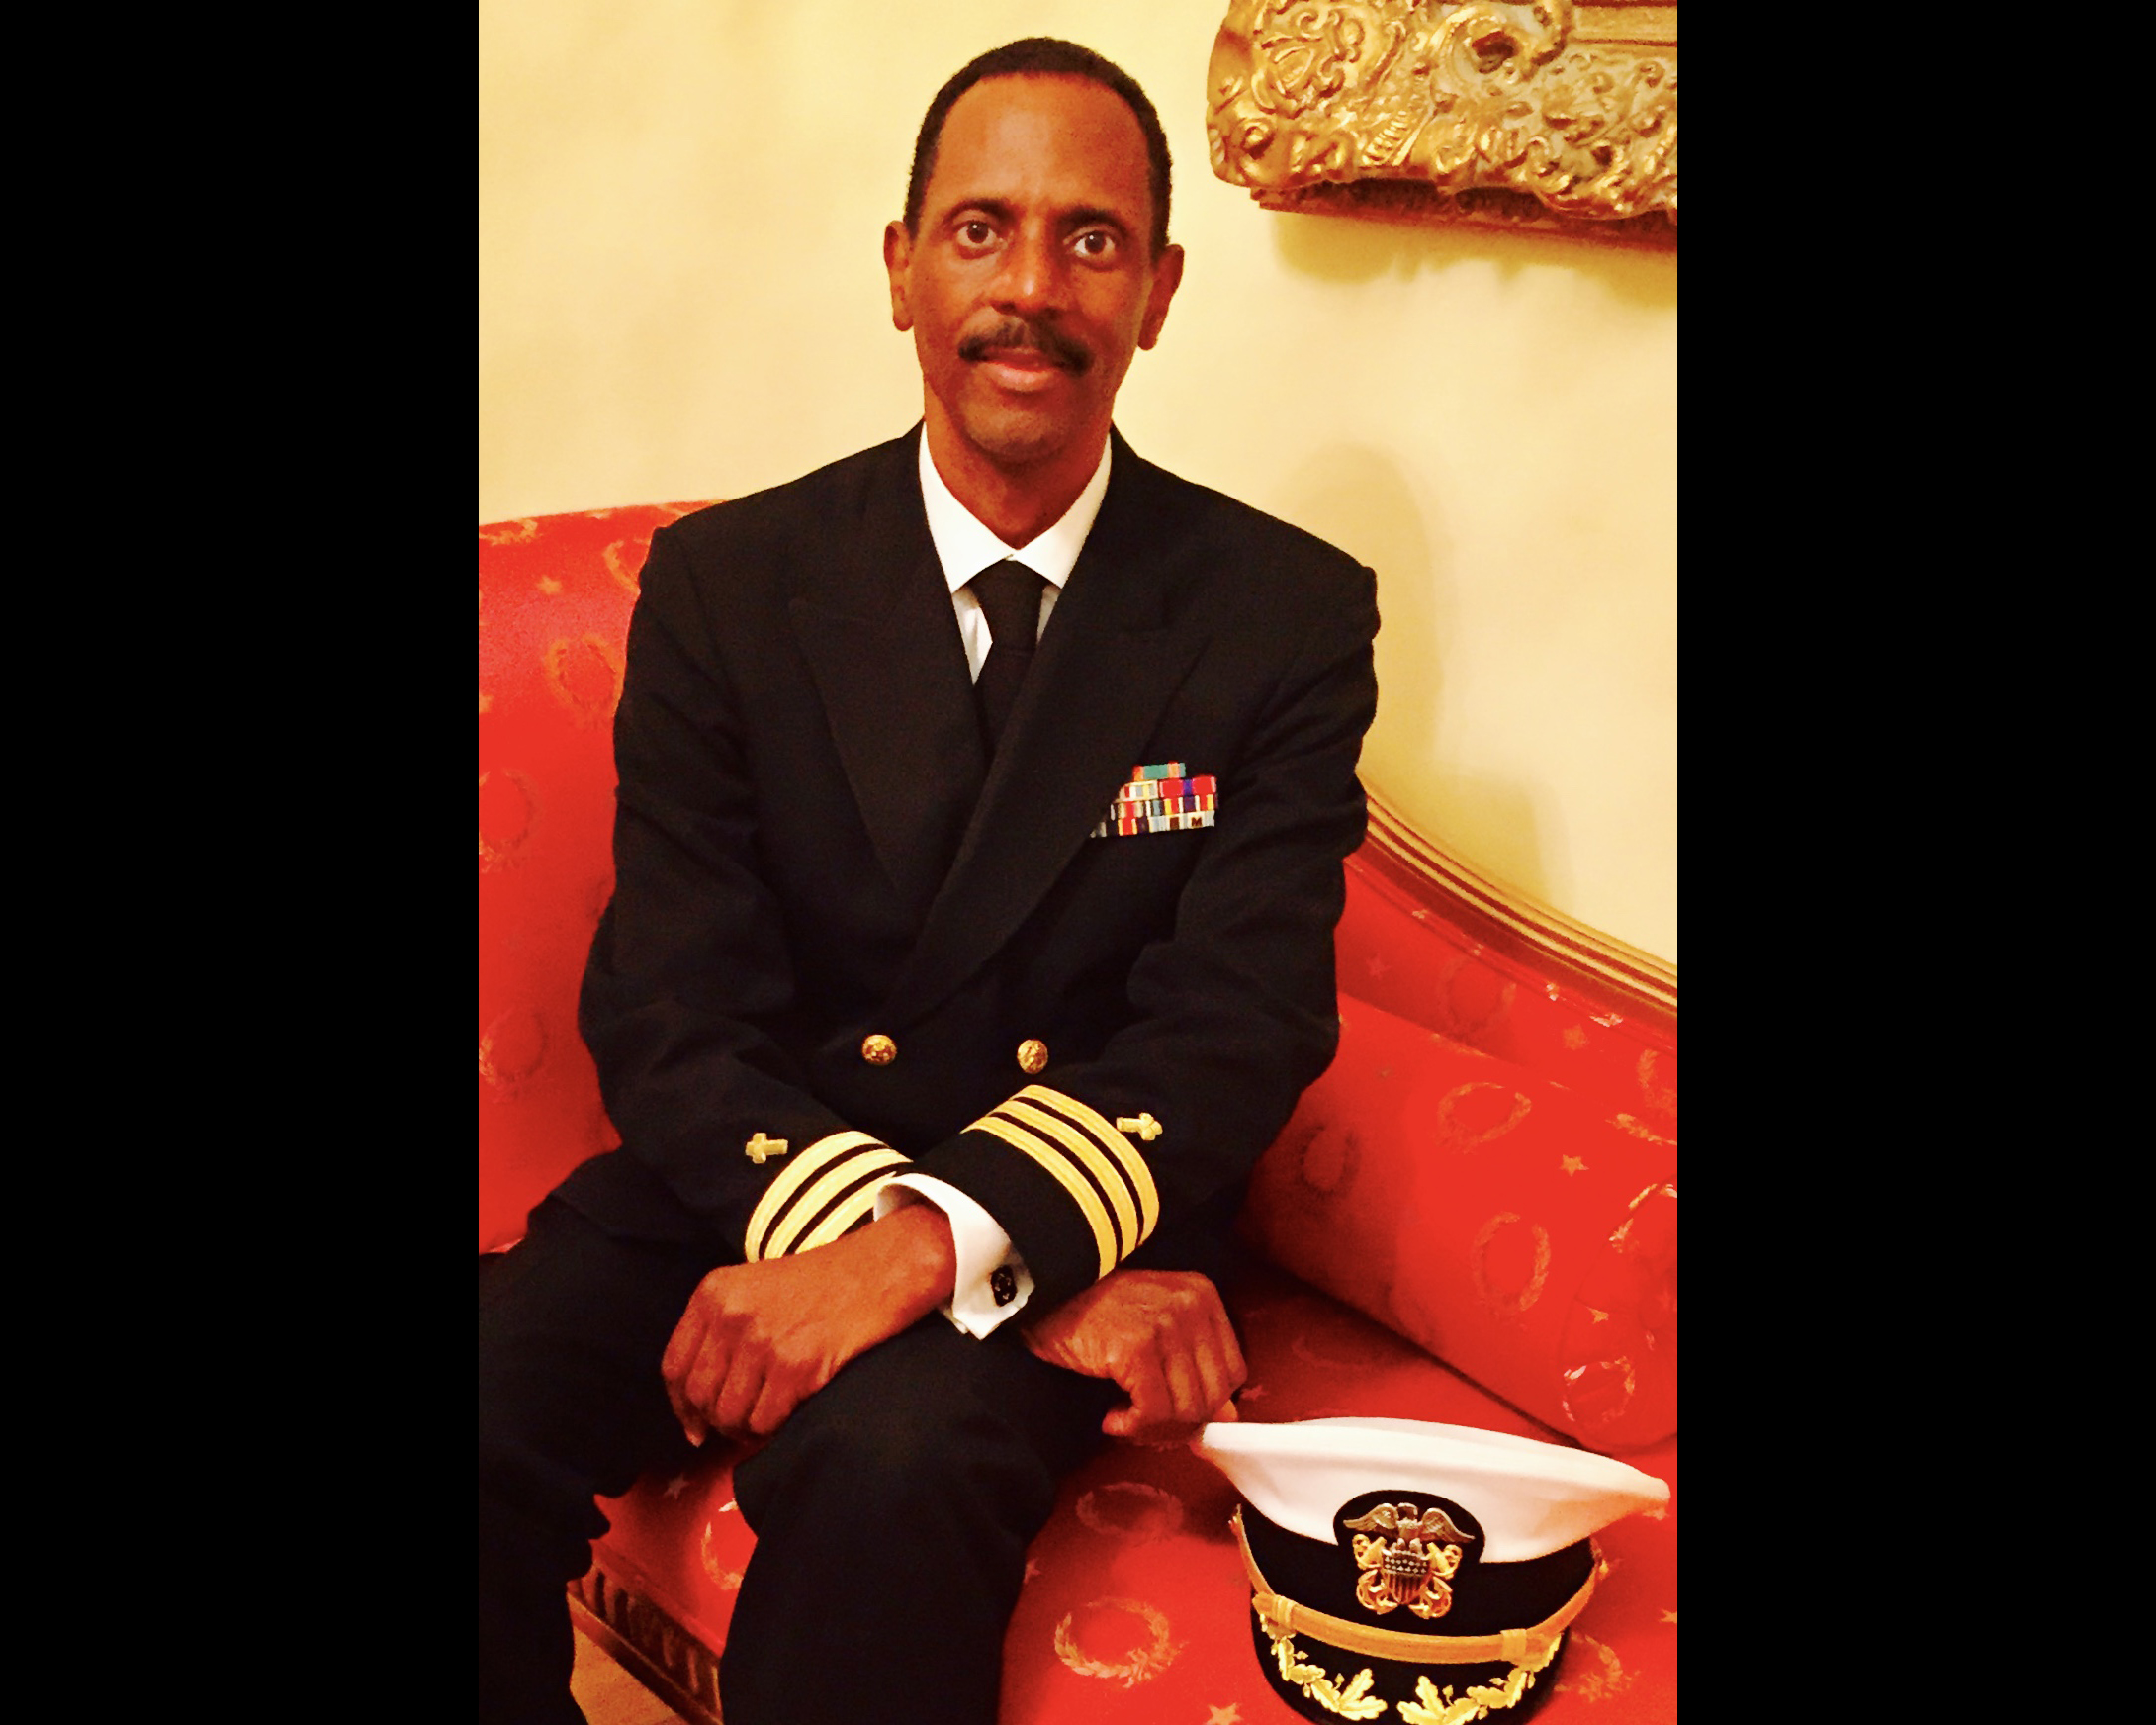 Washington Johnson, II is the third African-American Seventh-day Adventist to hold the rank in the United States Navy Chaplain Corp, following Captain Herman Kibble and Admiral Barry Black.